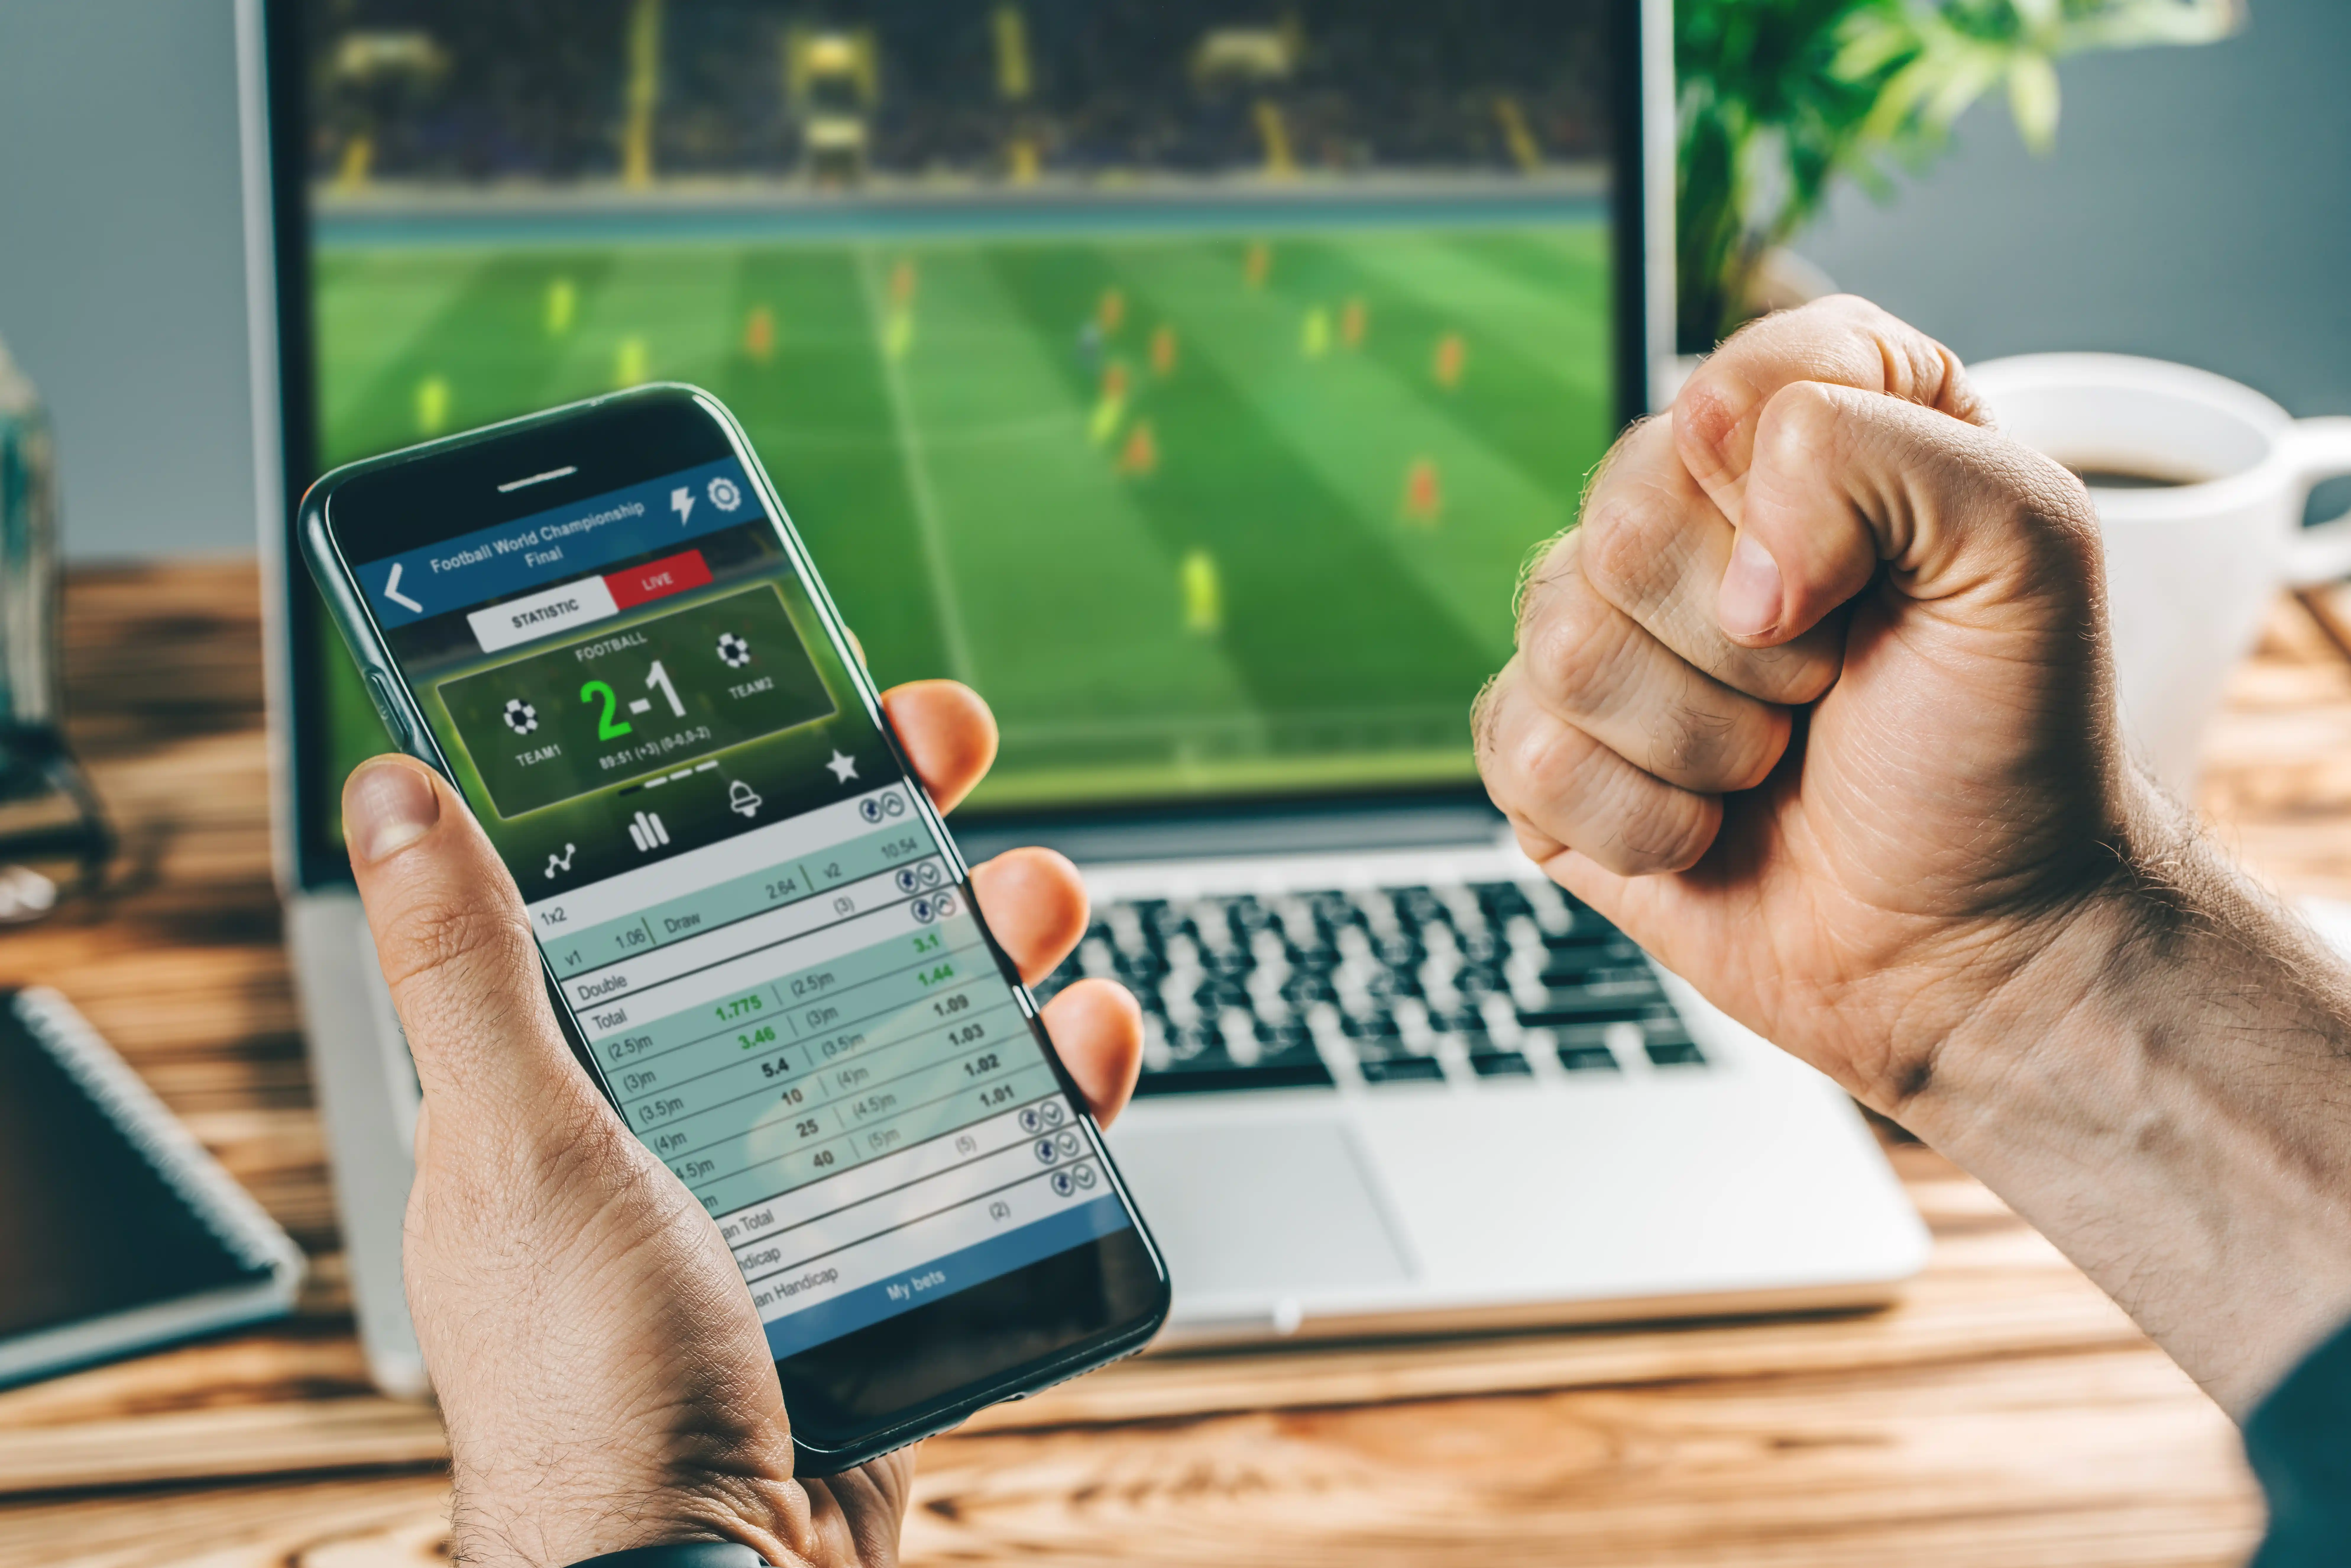 Legal Sports Betting: What You Need To Know